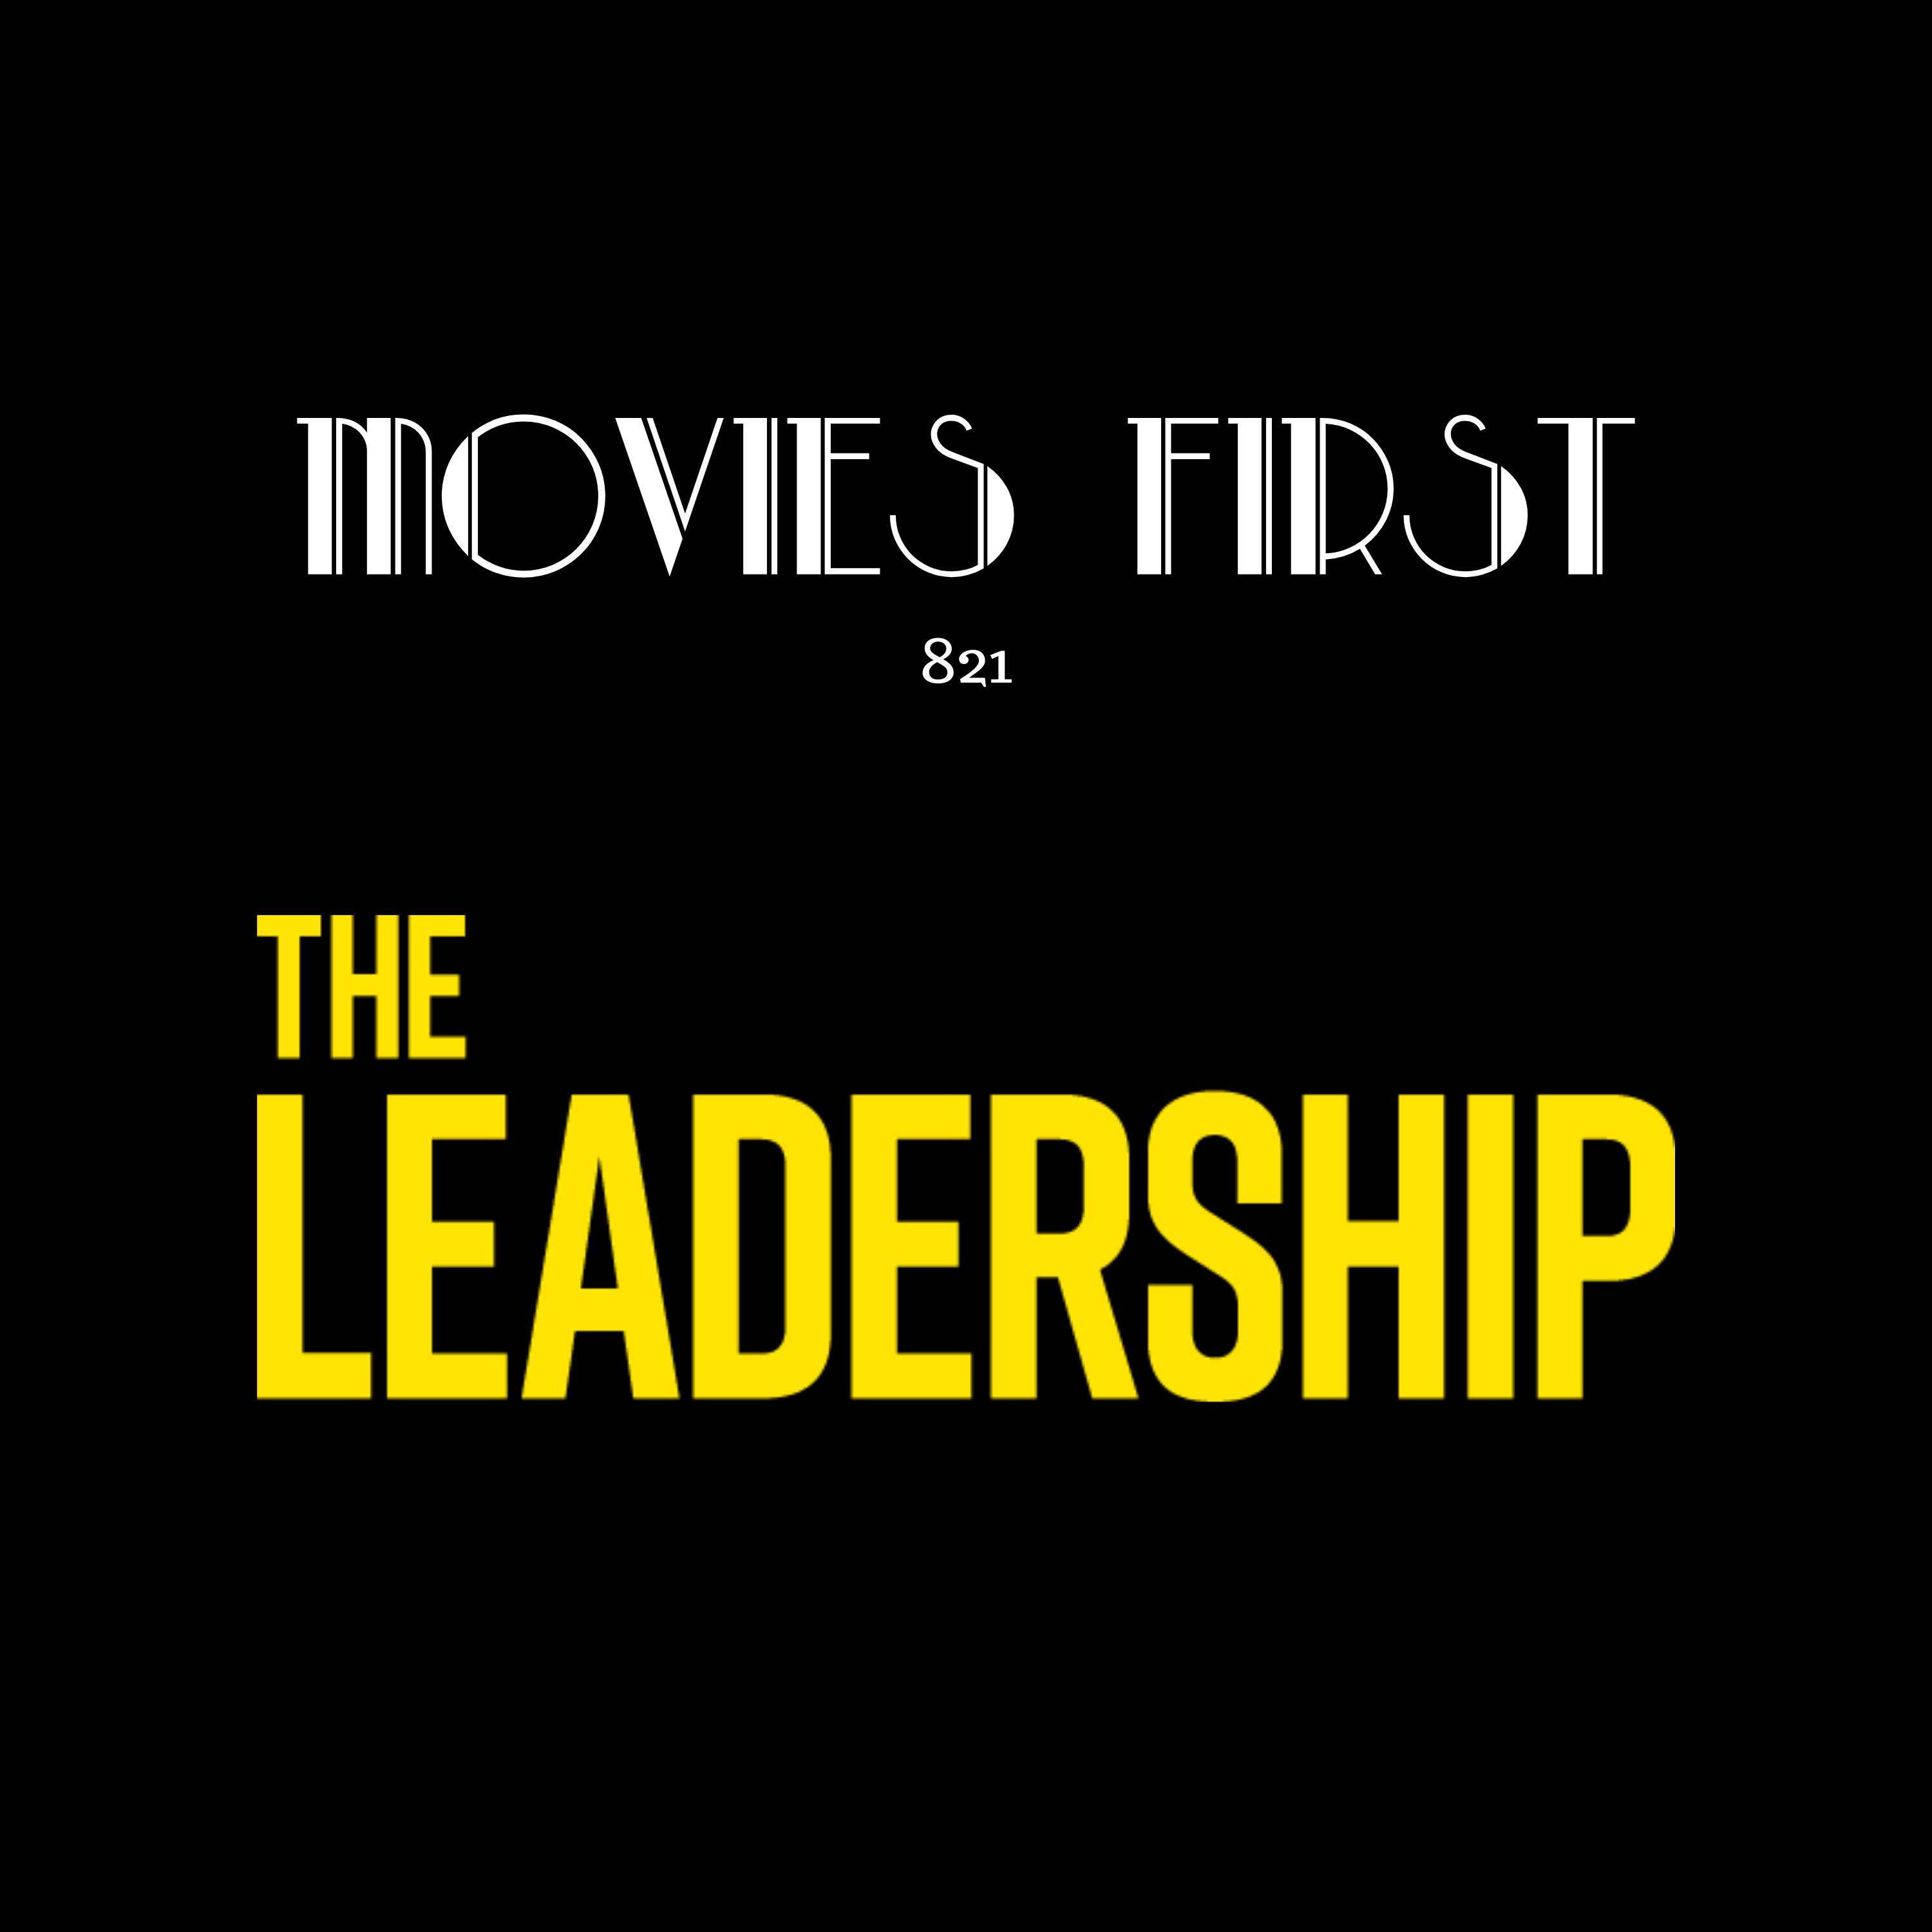 The Leadership (Documentary) (the @MoviesFirst review)